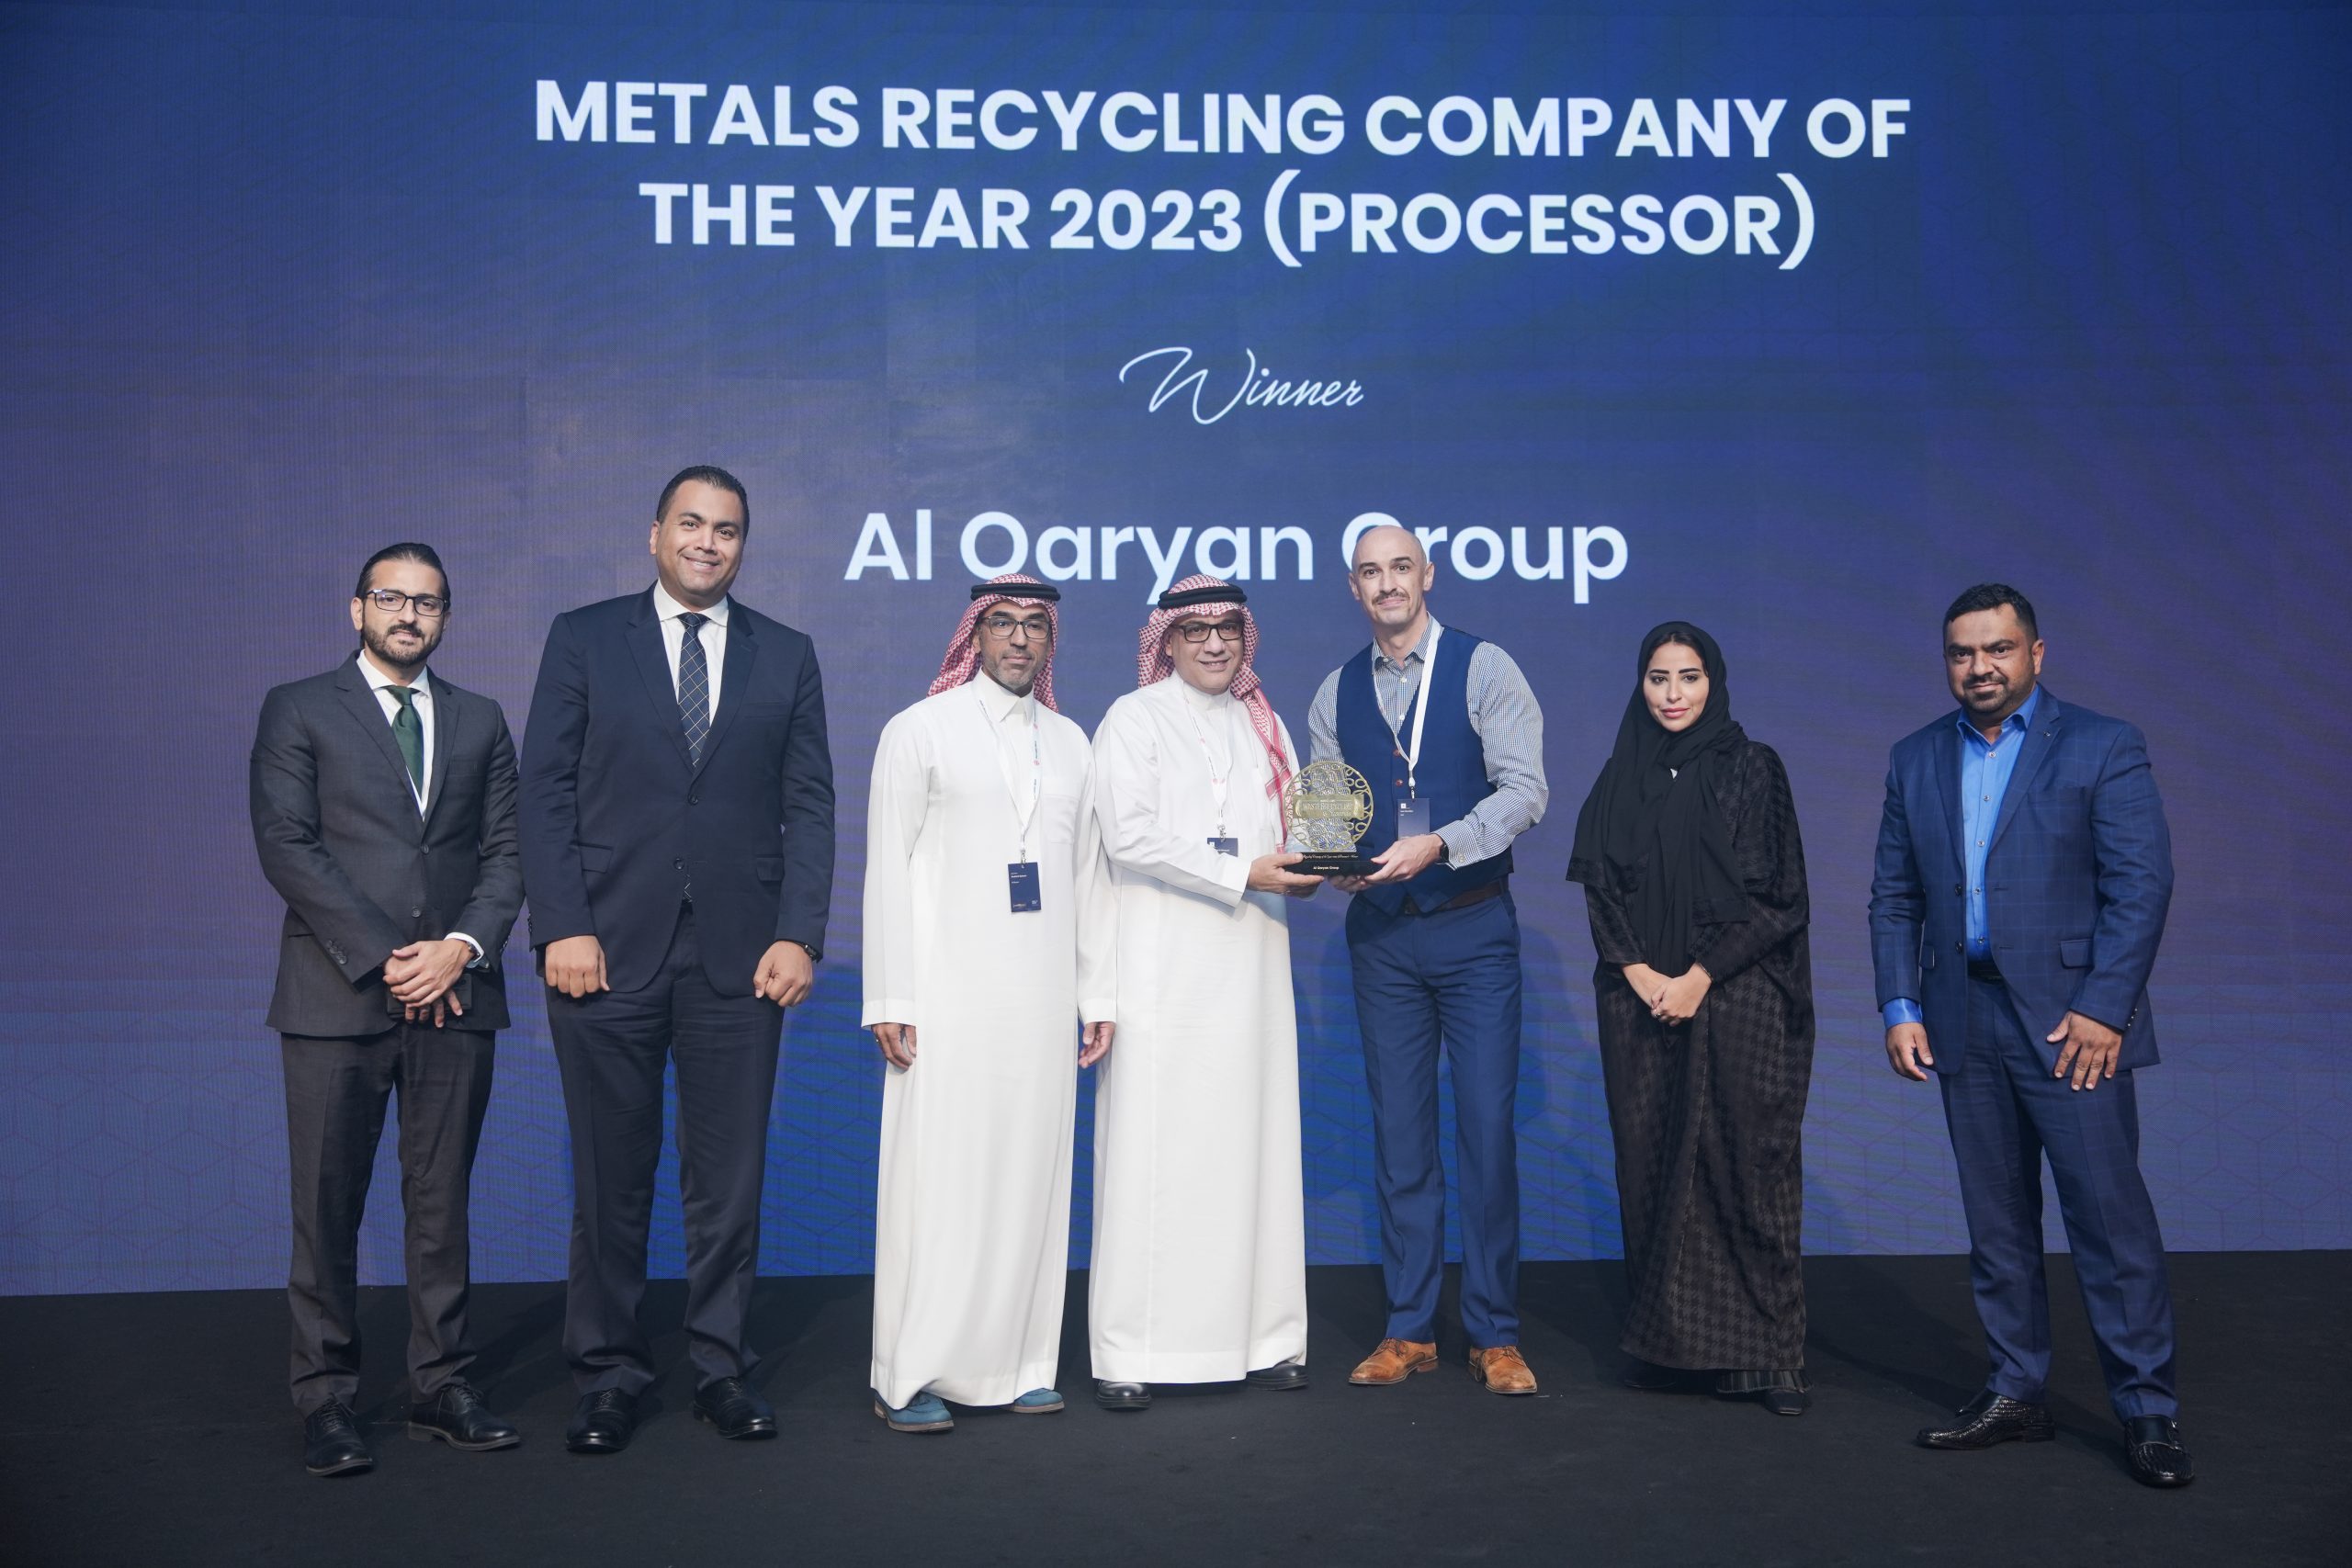 Al Qaryan Group Secures its Fifth Consecutive Company of the Year Award in Metals Recycling